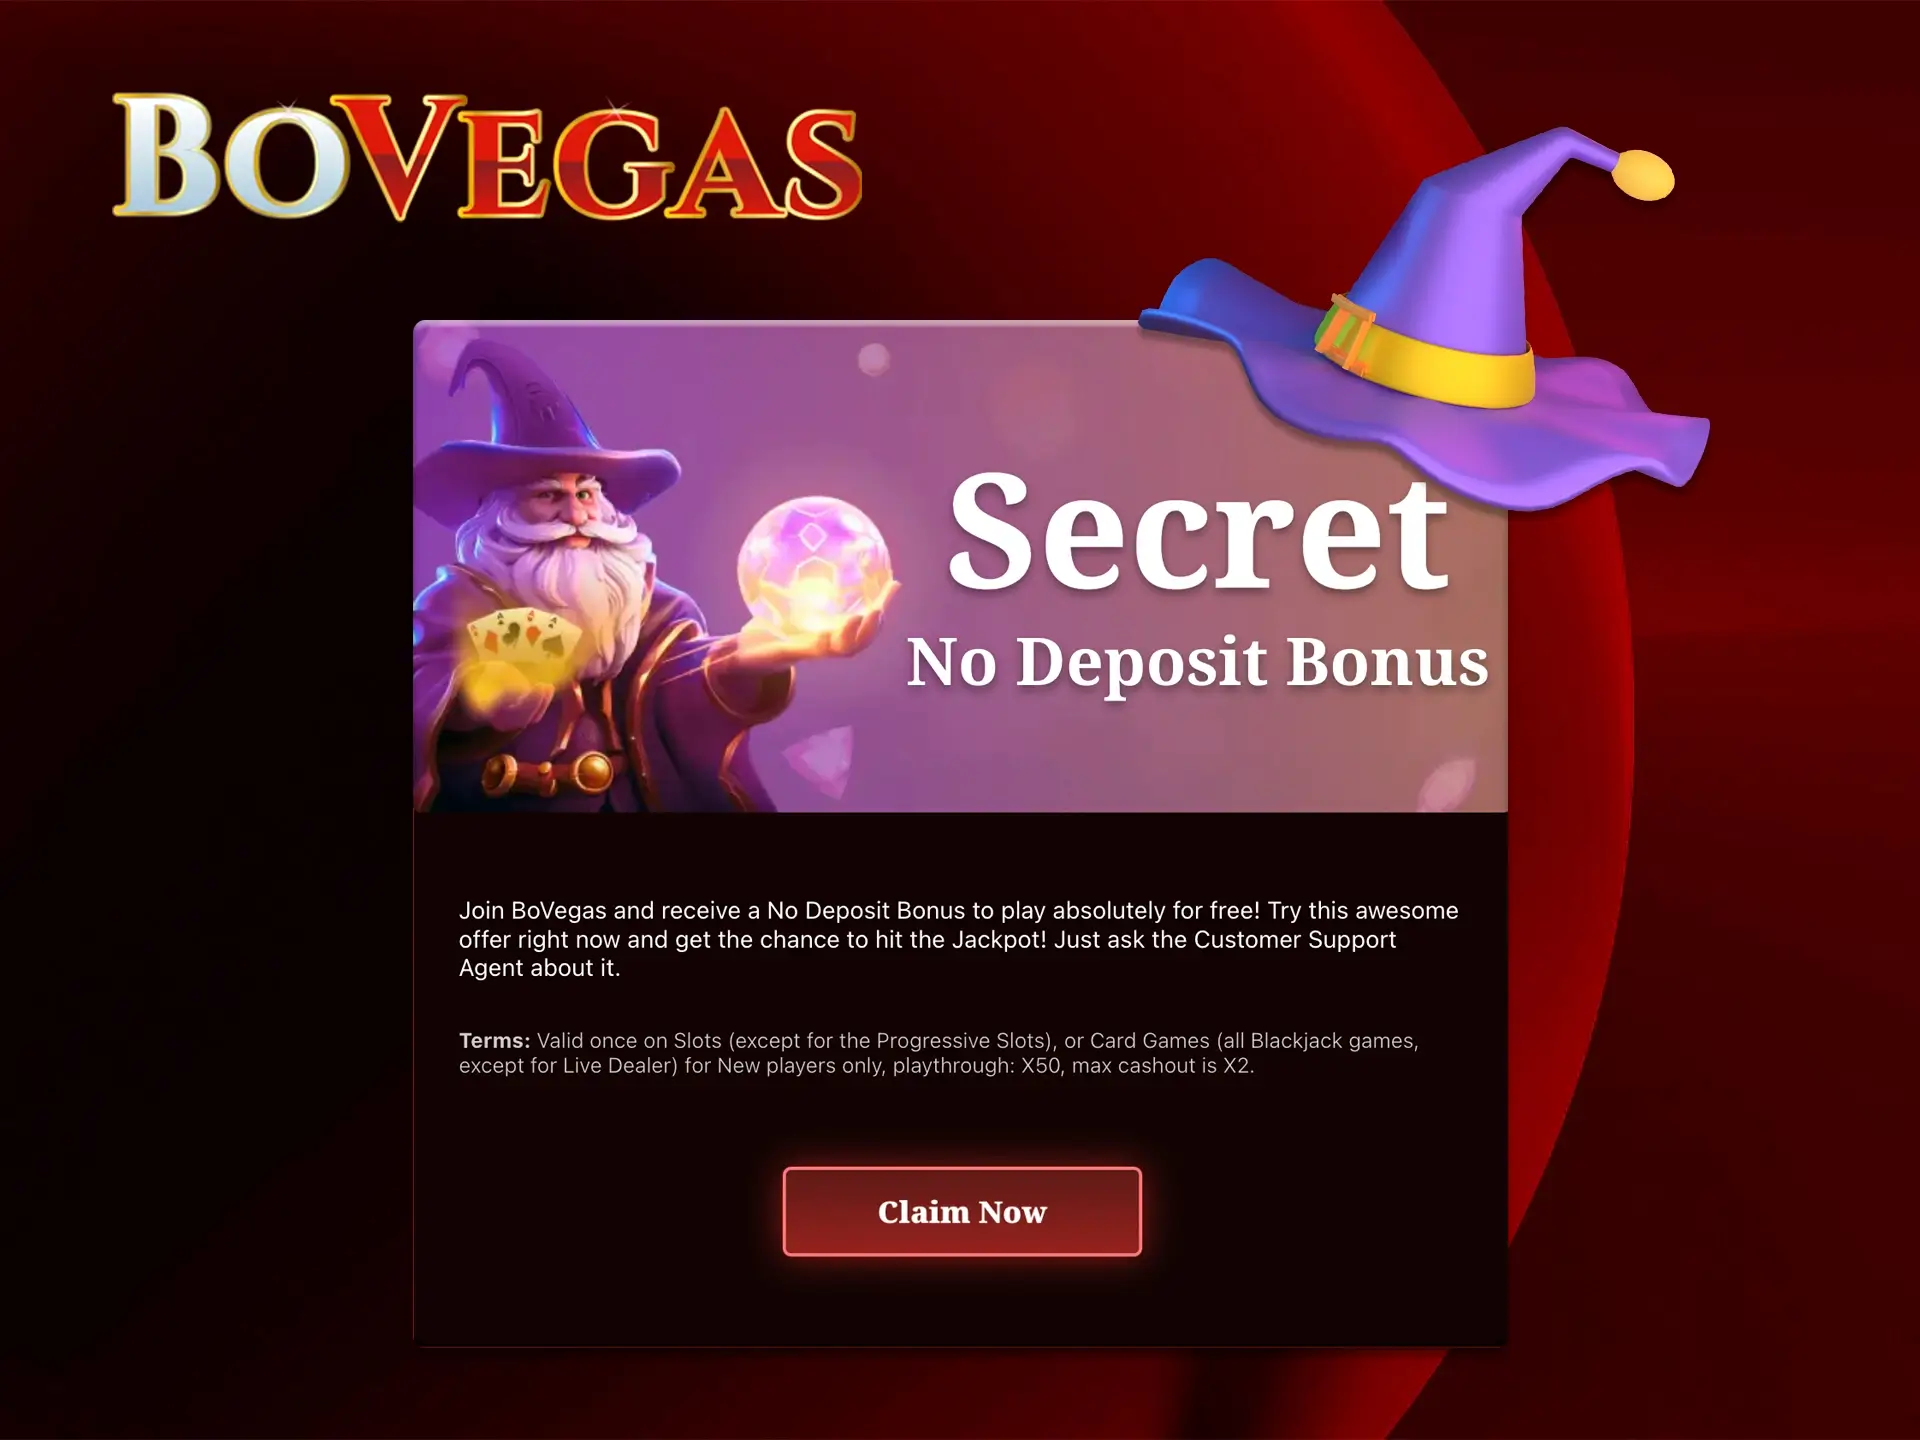 Try your chances and luck with a unique no deposit bonus from BoVegas Casino.